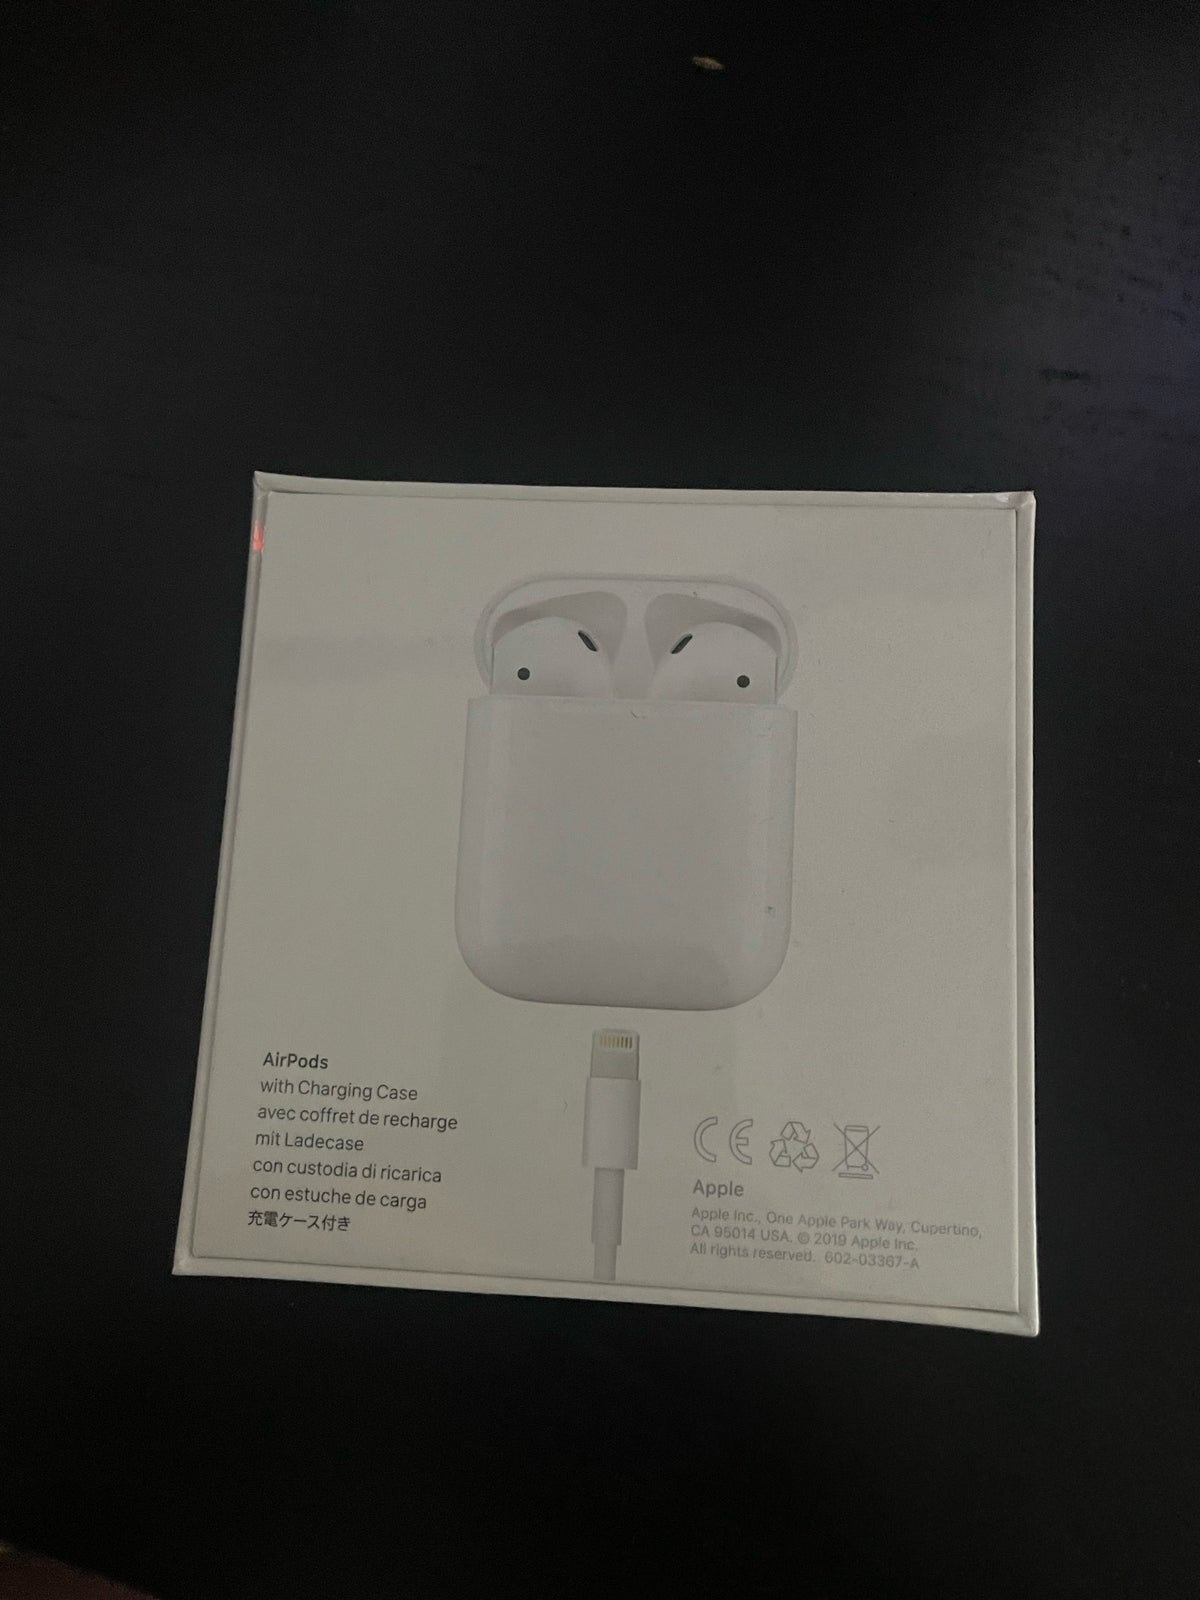 Bluetooth headset, t. iPhone, AirPods 2 generation